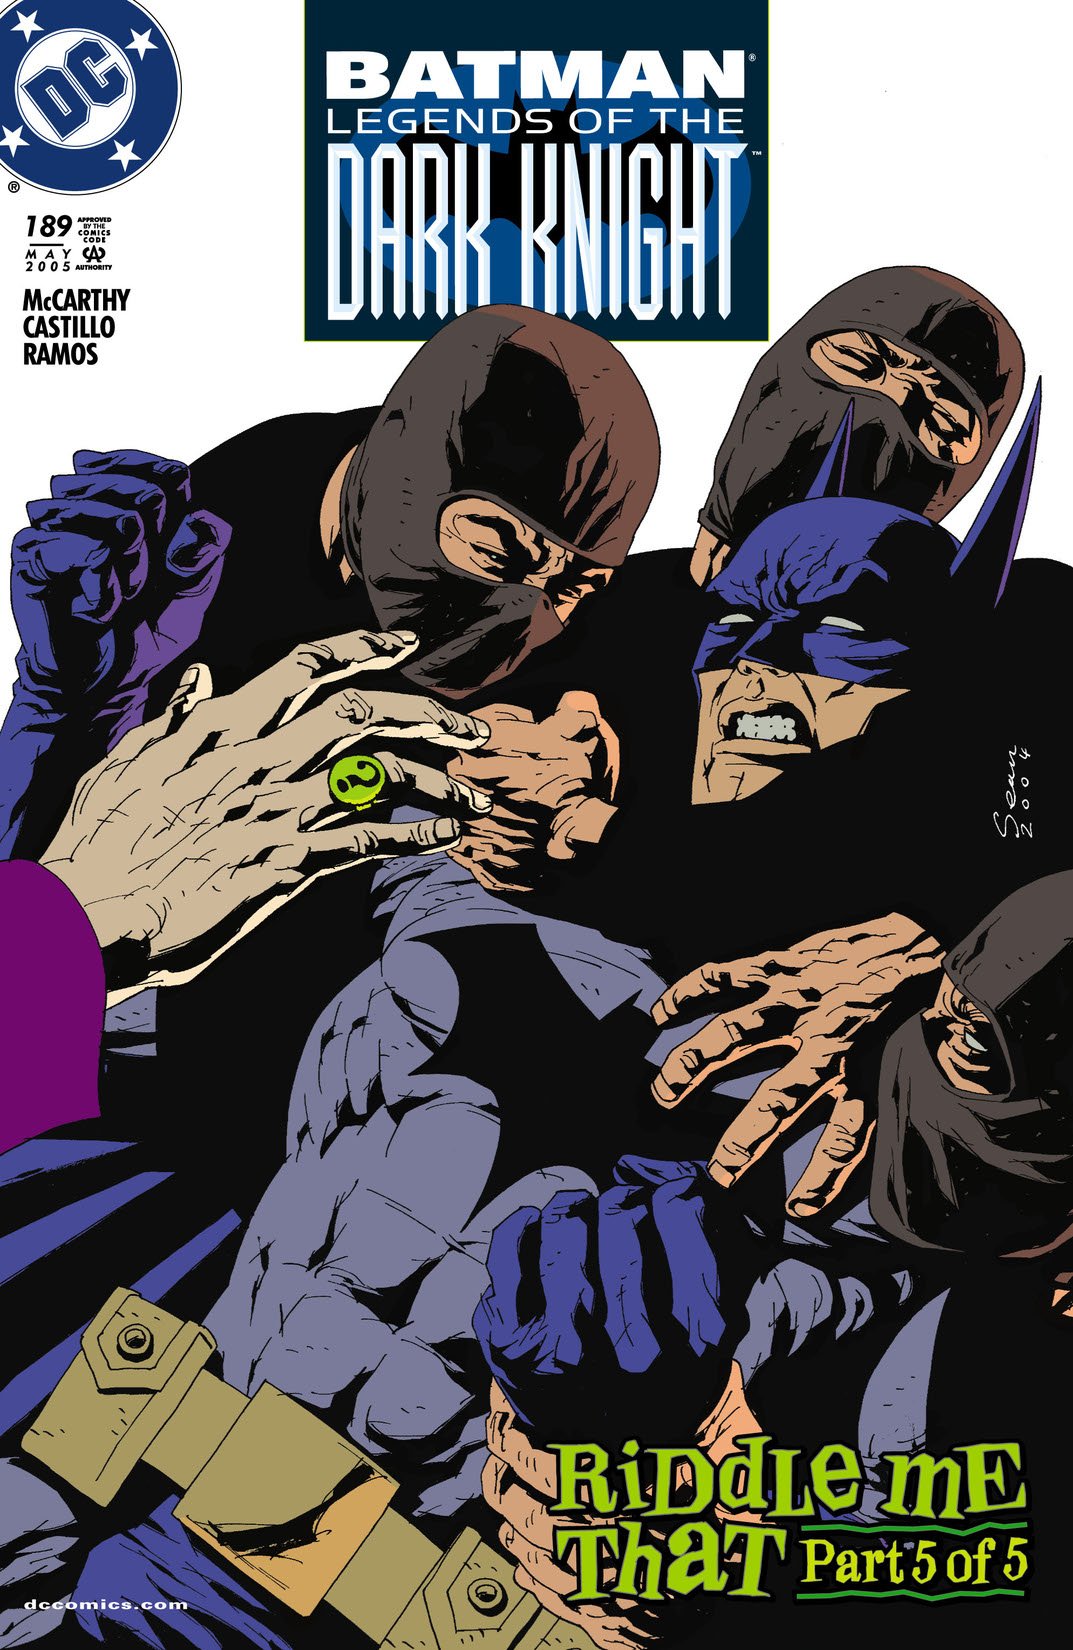 Batman: Legends of the Dark Knight #189 preview images